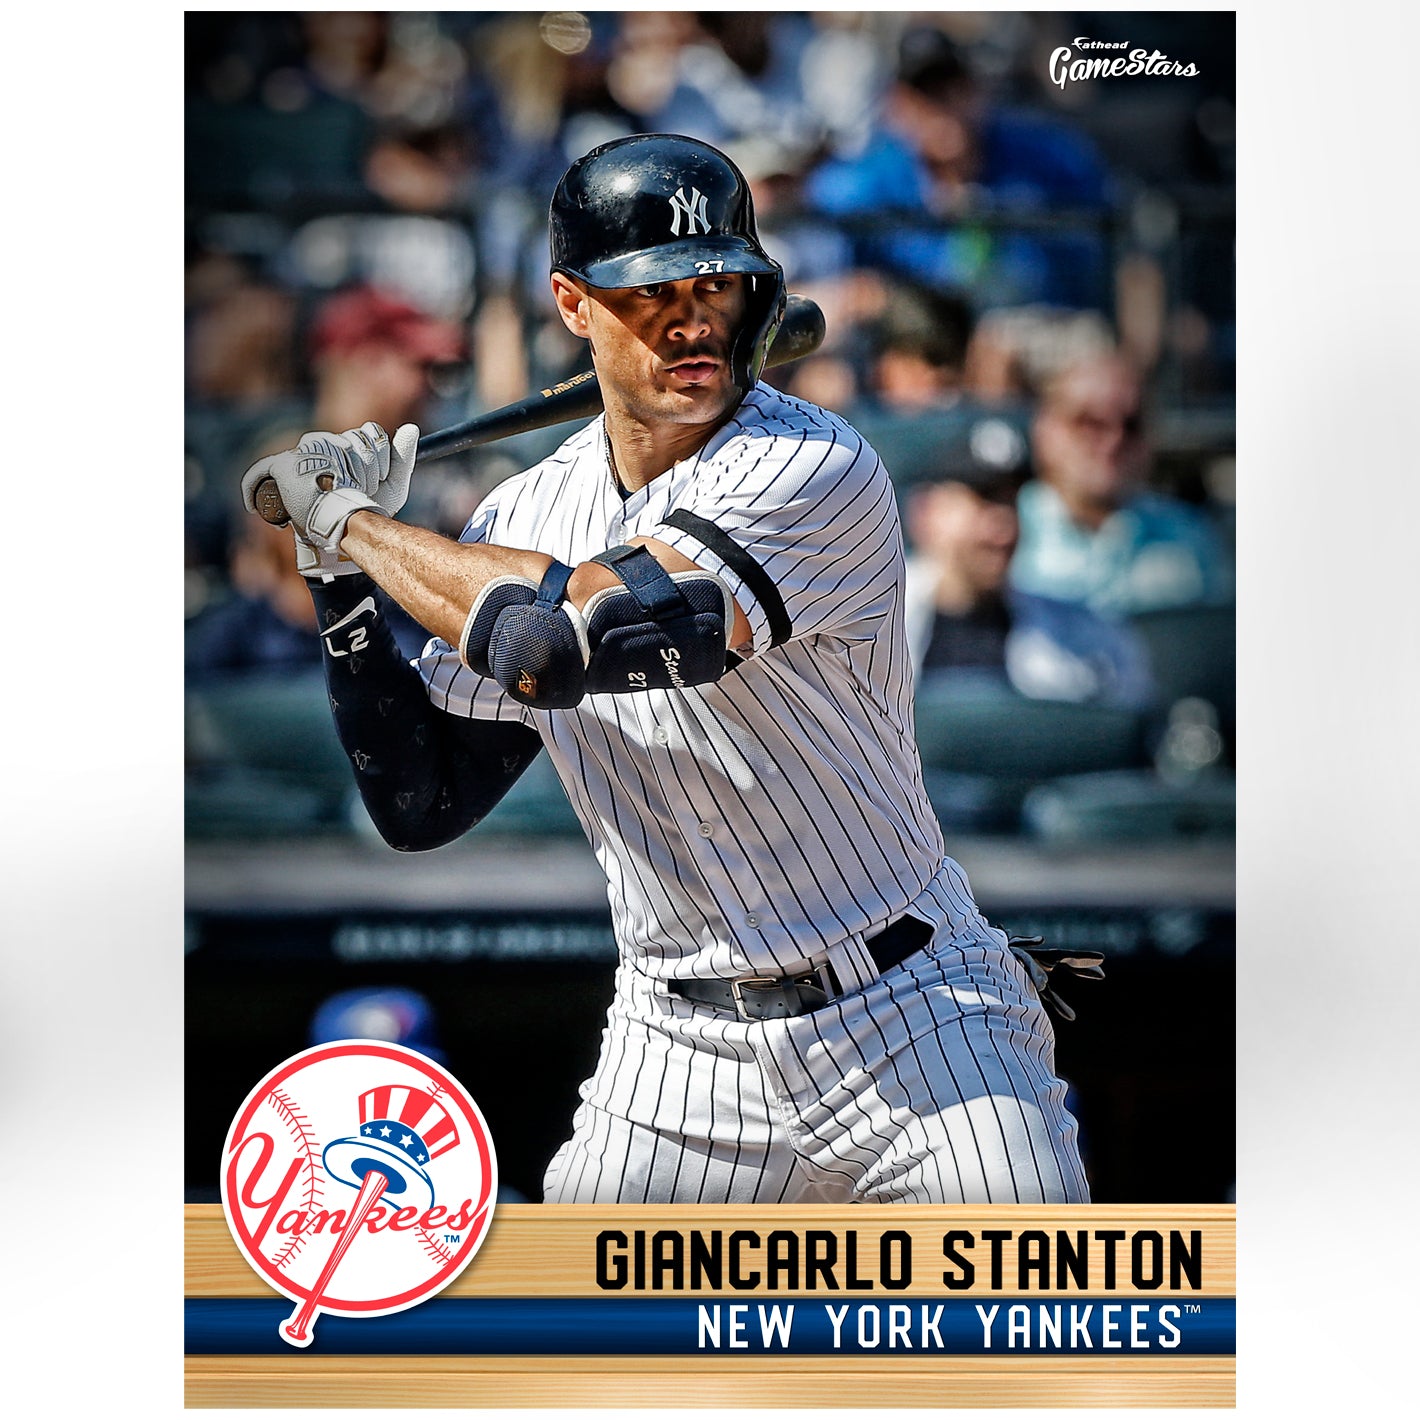 Yankees officially acquire Giancarlo Stanton